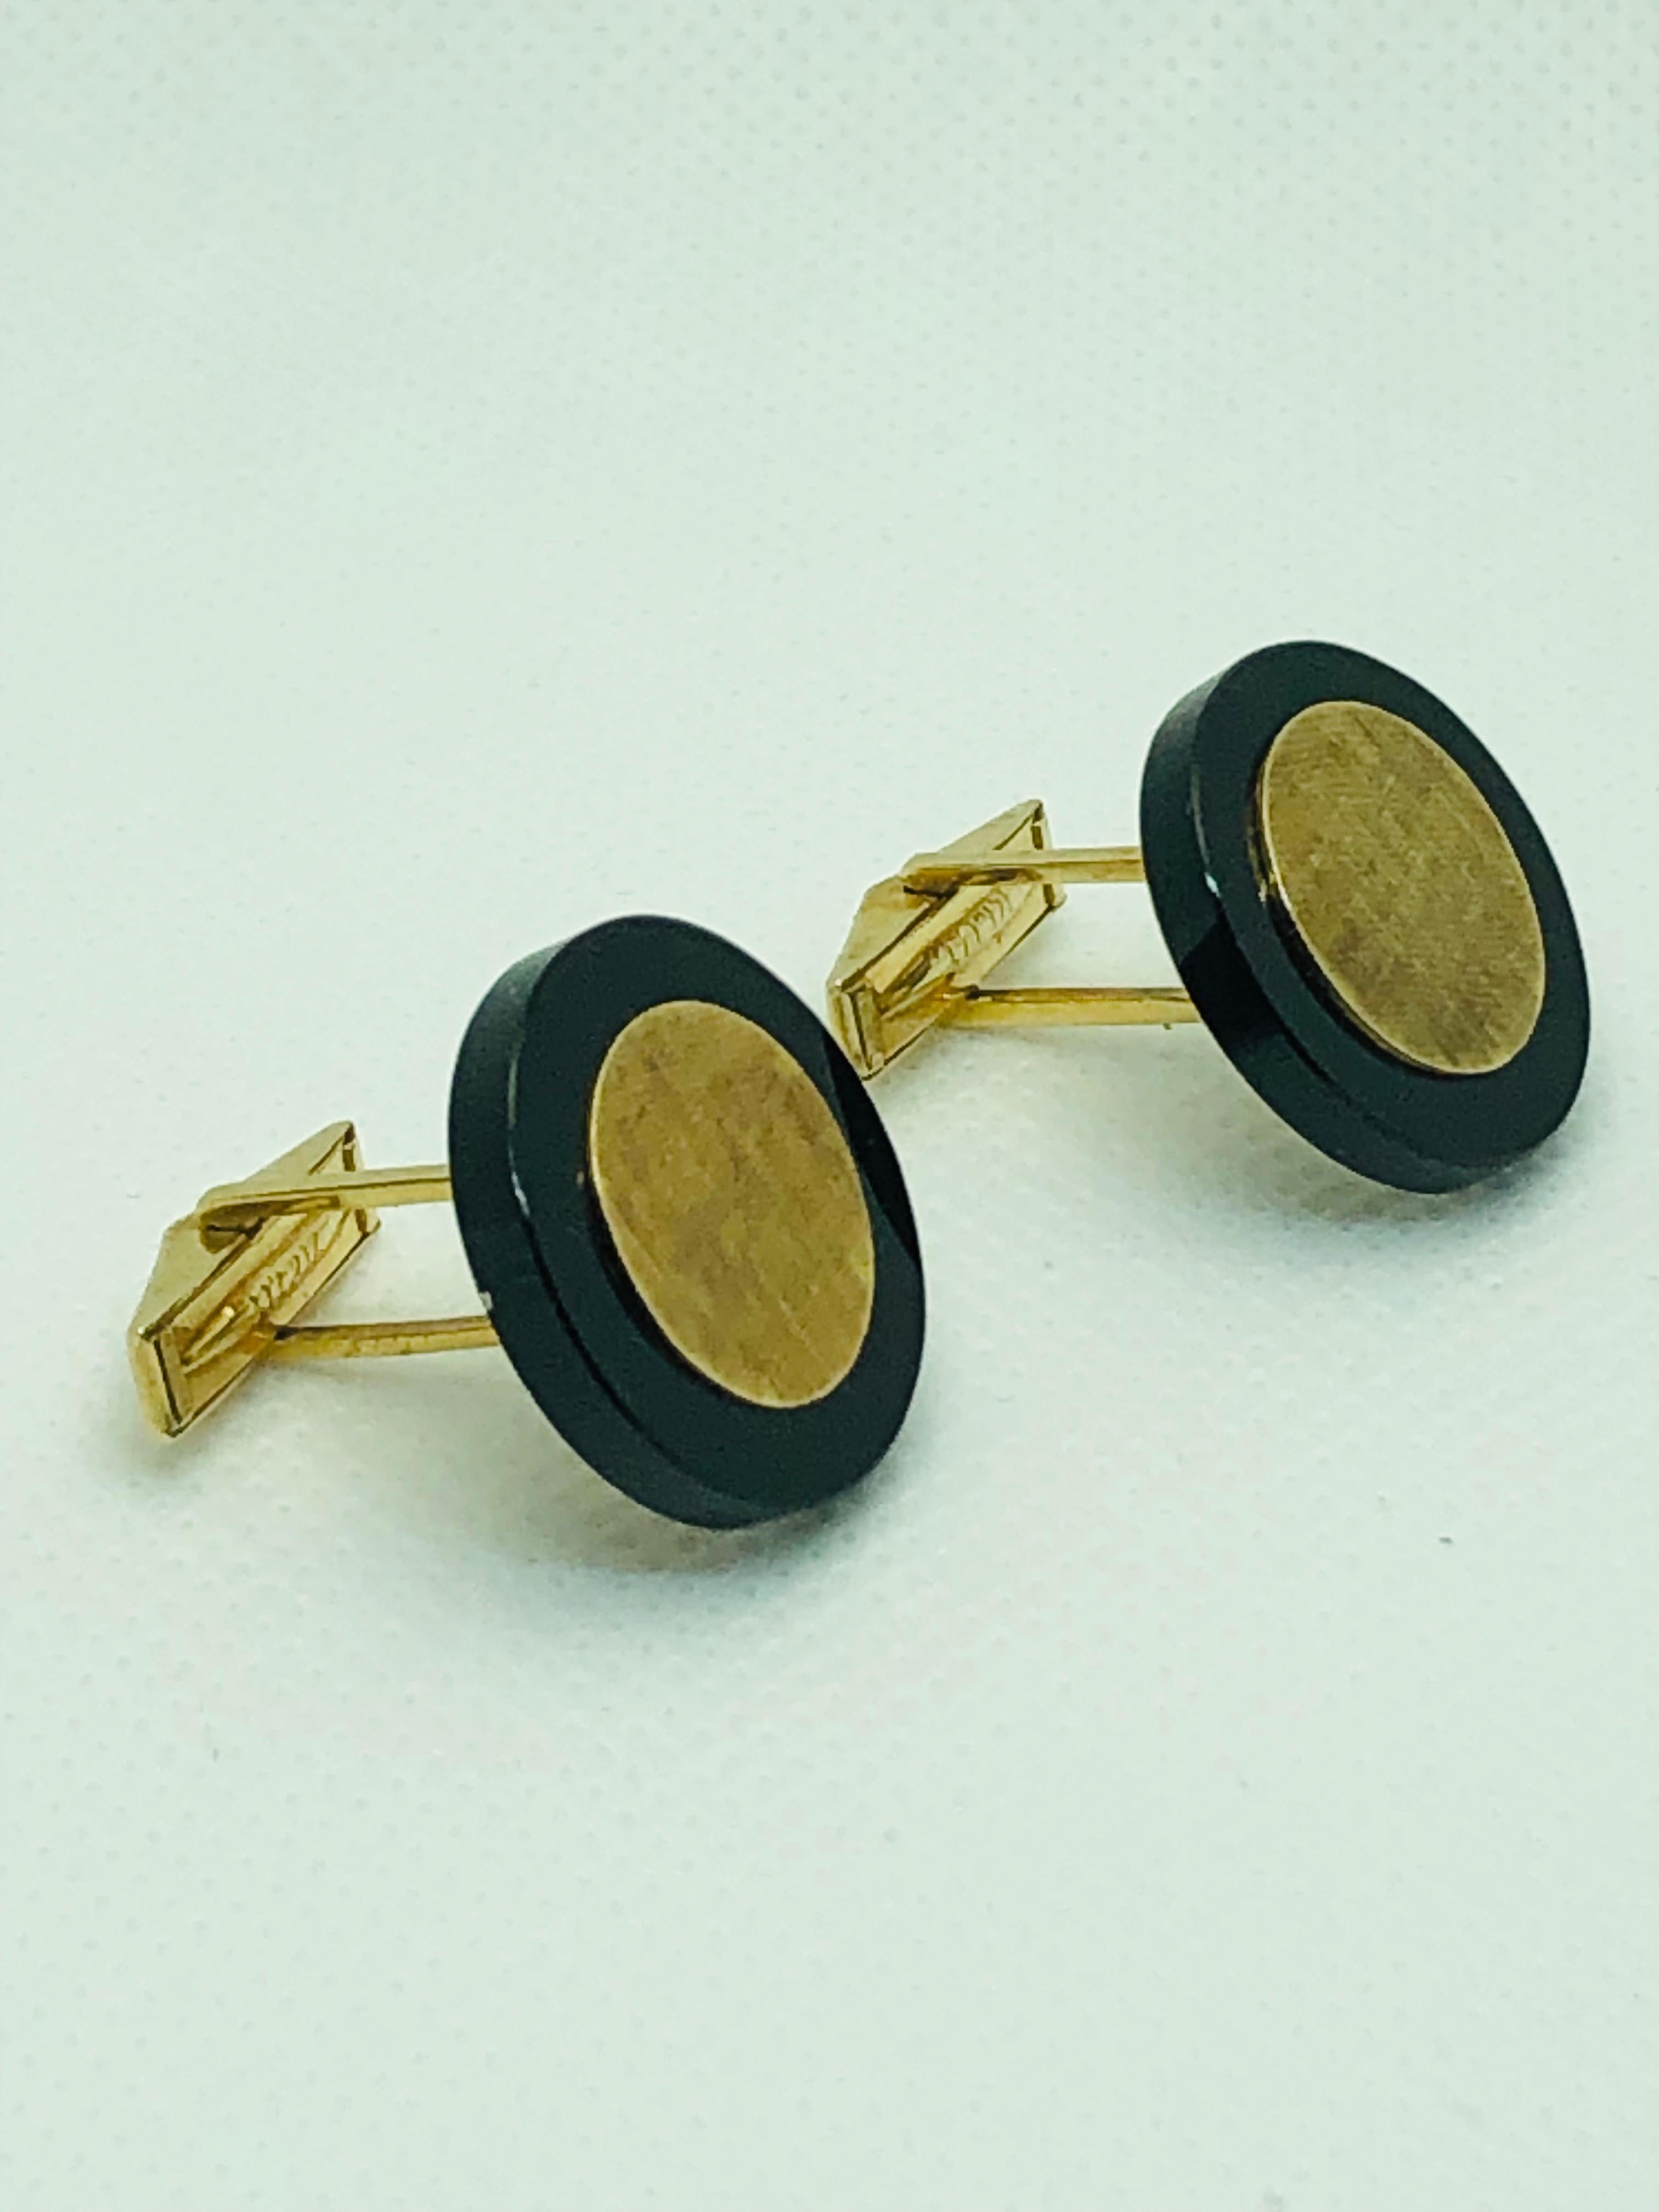 Vintage 14K yellow Gold Cufflinks. The set has an onyx round base topped with gold. The gold has a gorgeous etched florentine finish. They measure 3/4 inches in diameter.